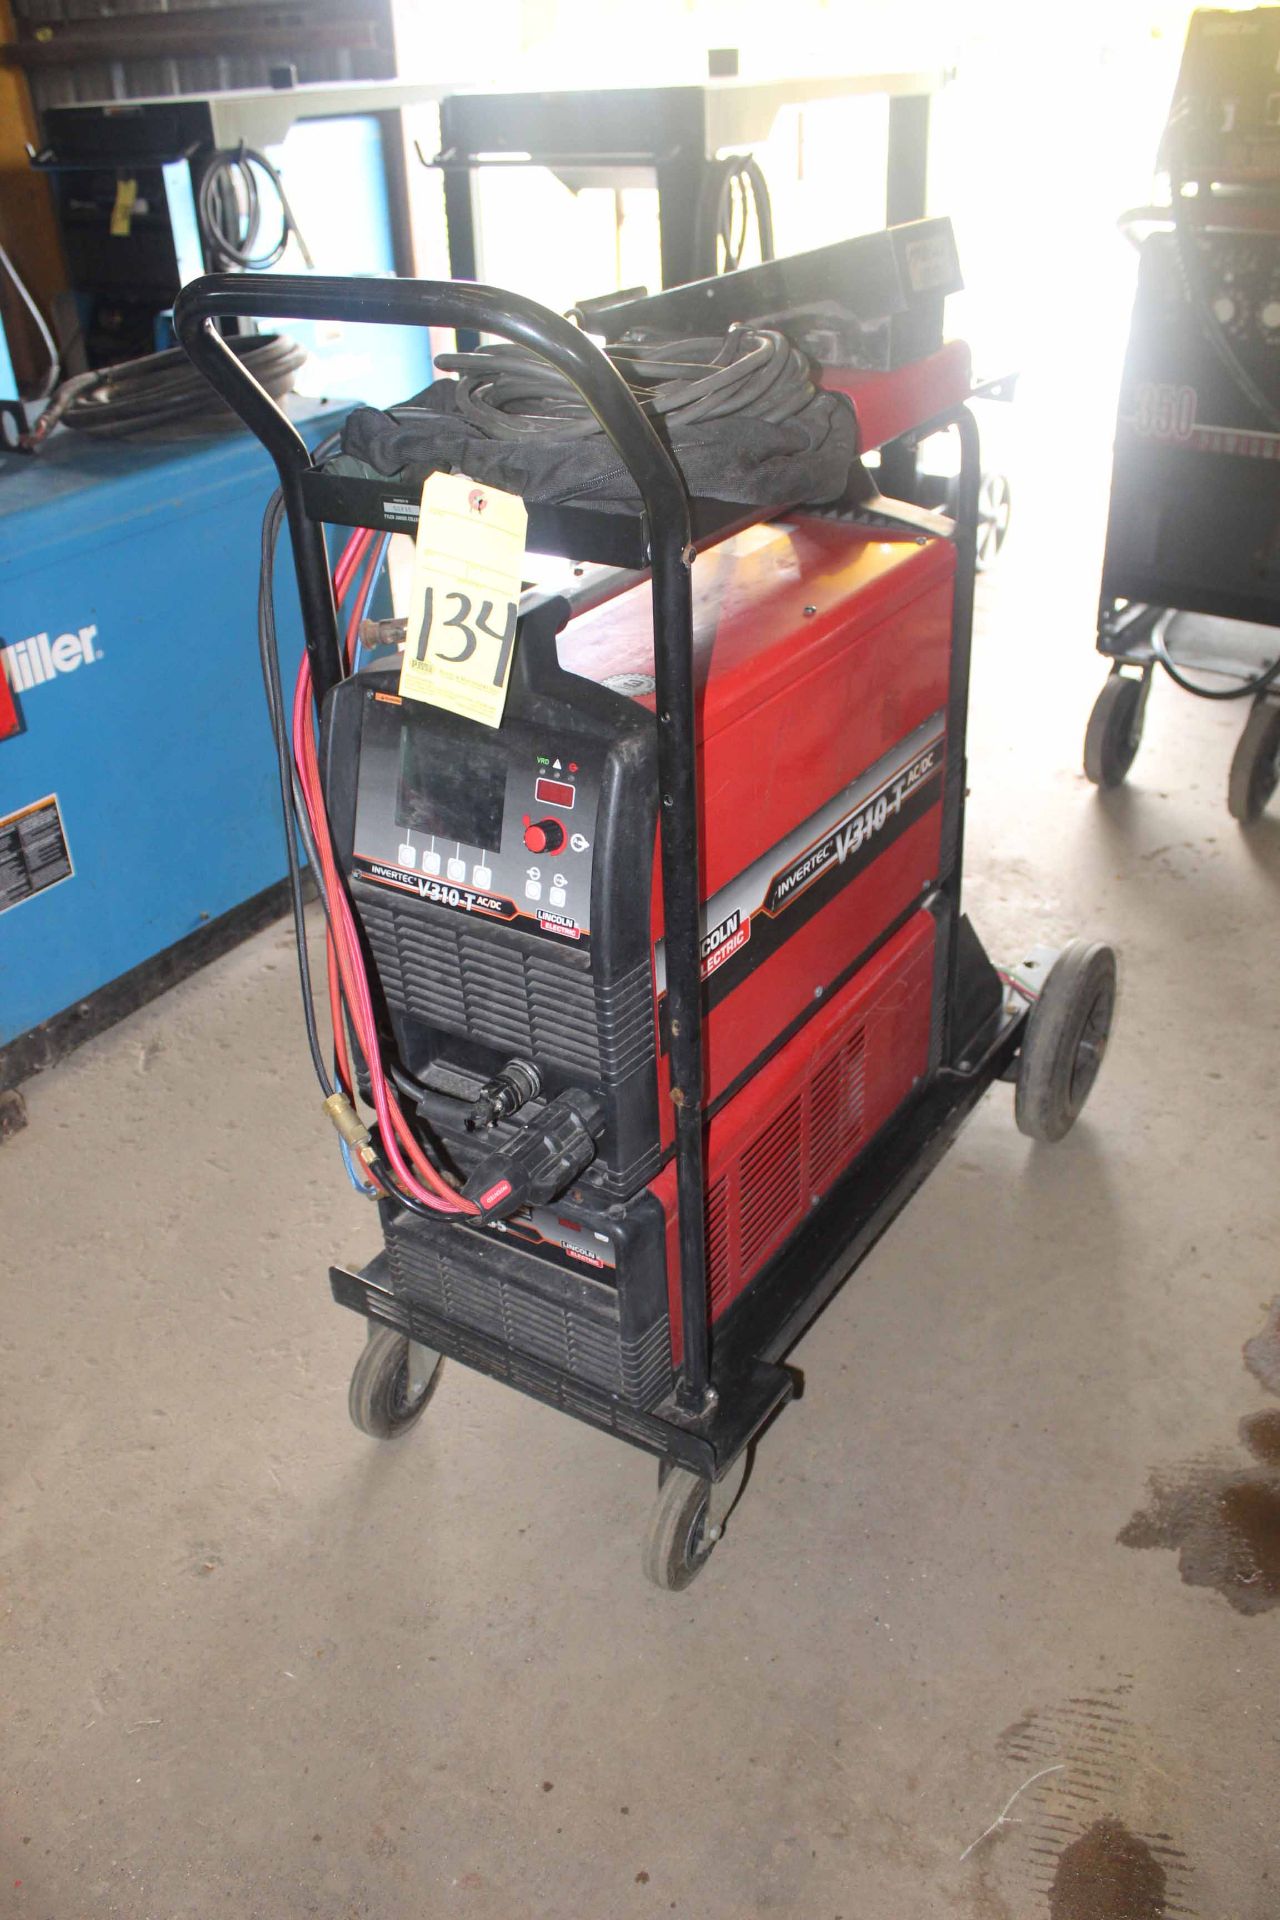 WELDING MACHINE, LINCOLN MDL. INVERTEC V310 AC/DC, 300 amps @ 36 v., 100% duty cycle, Coolarc 35